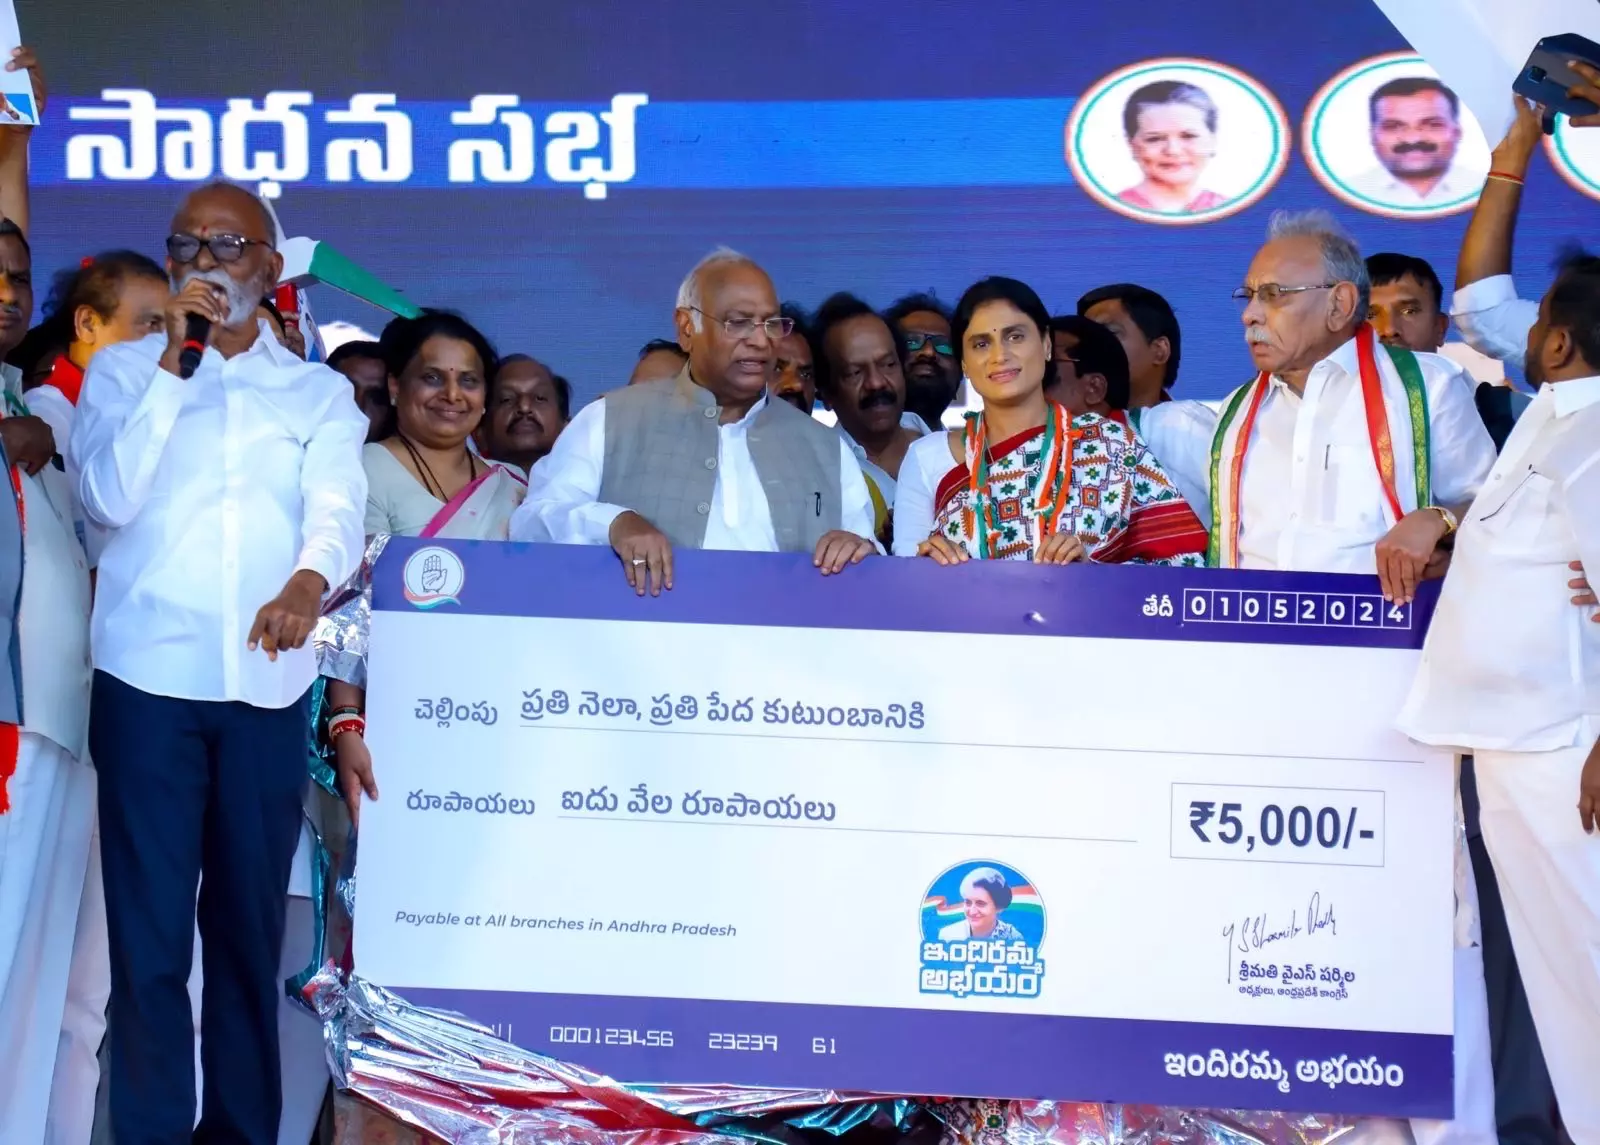 Congress Promises Rs 5000 as Dole Per Month for Each Poor Family in AP